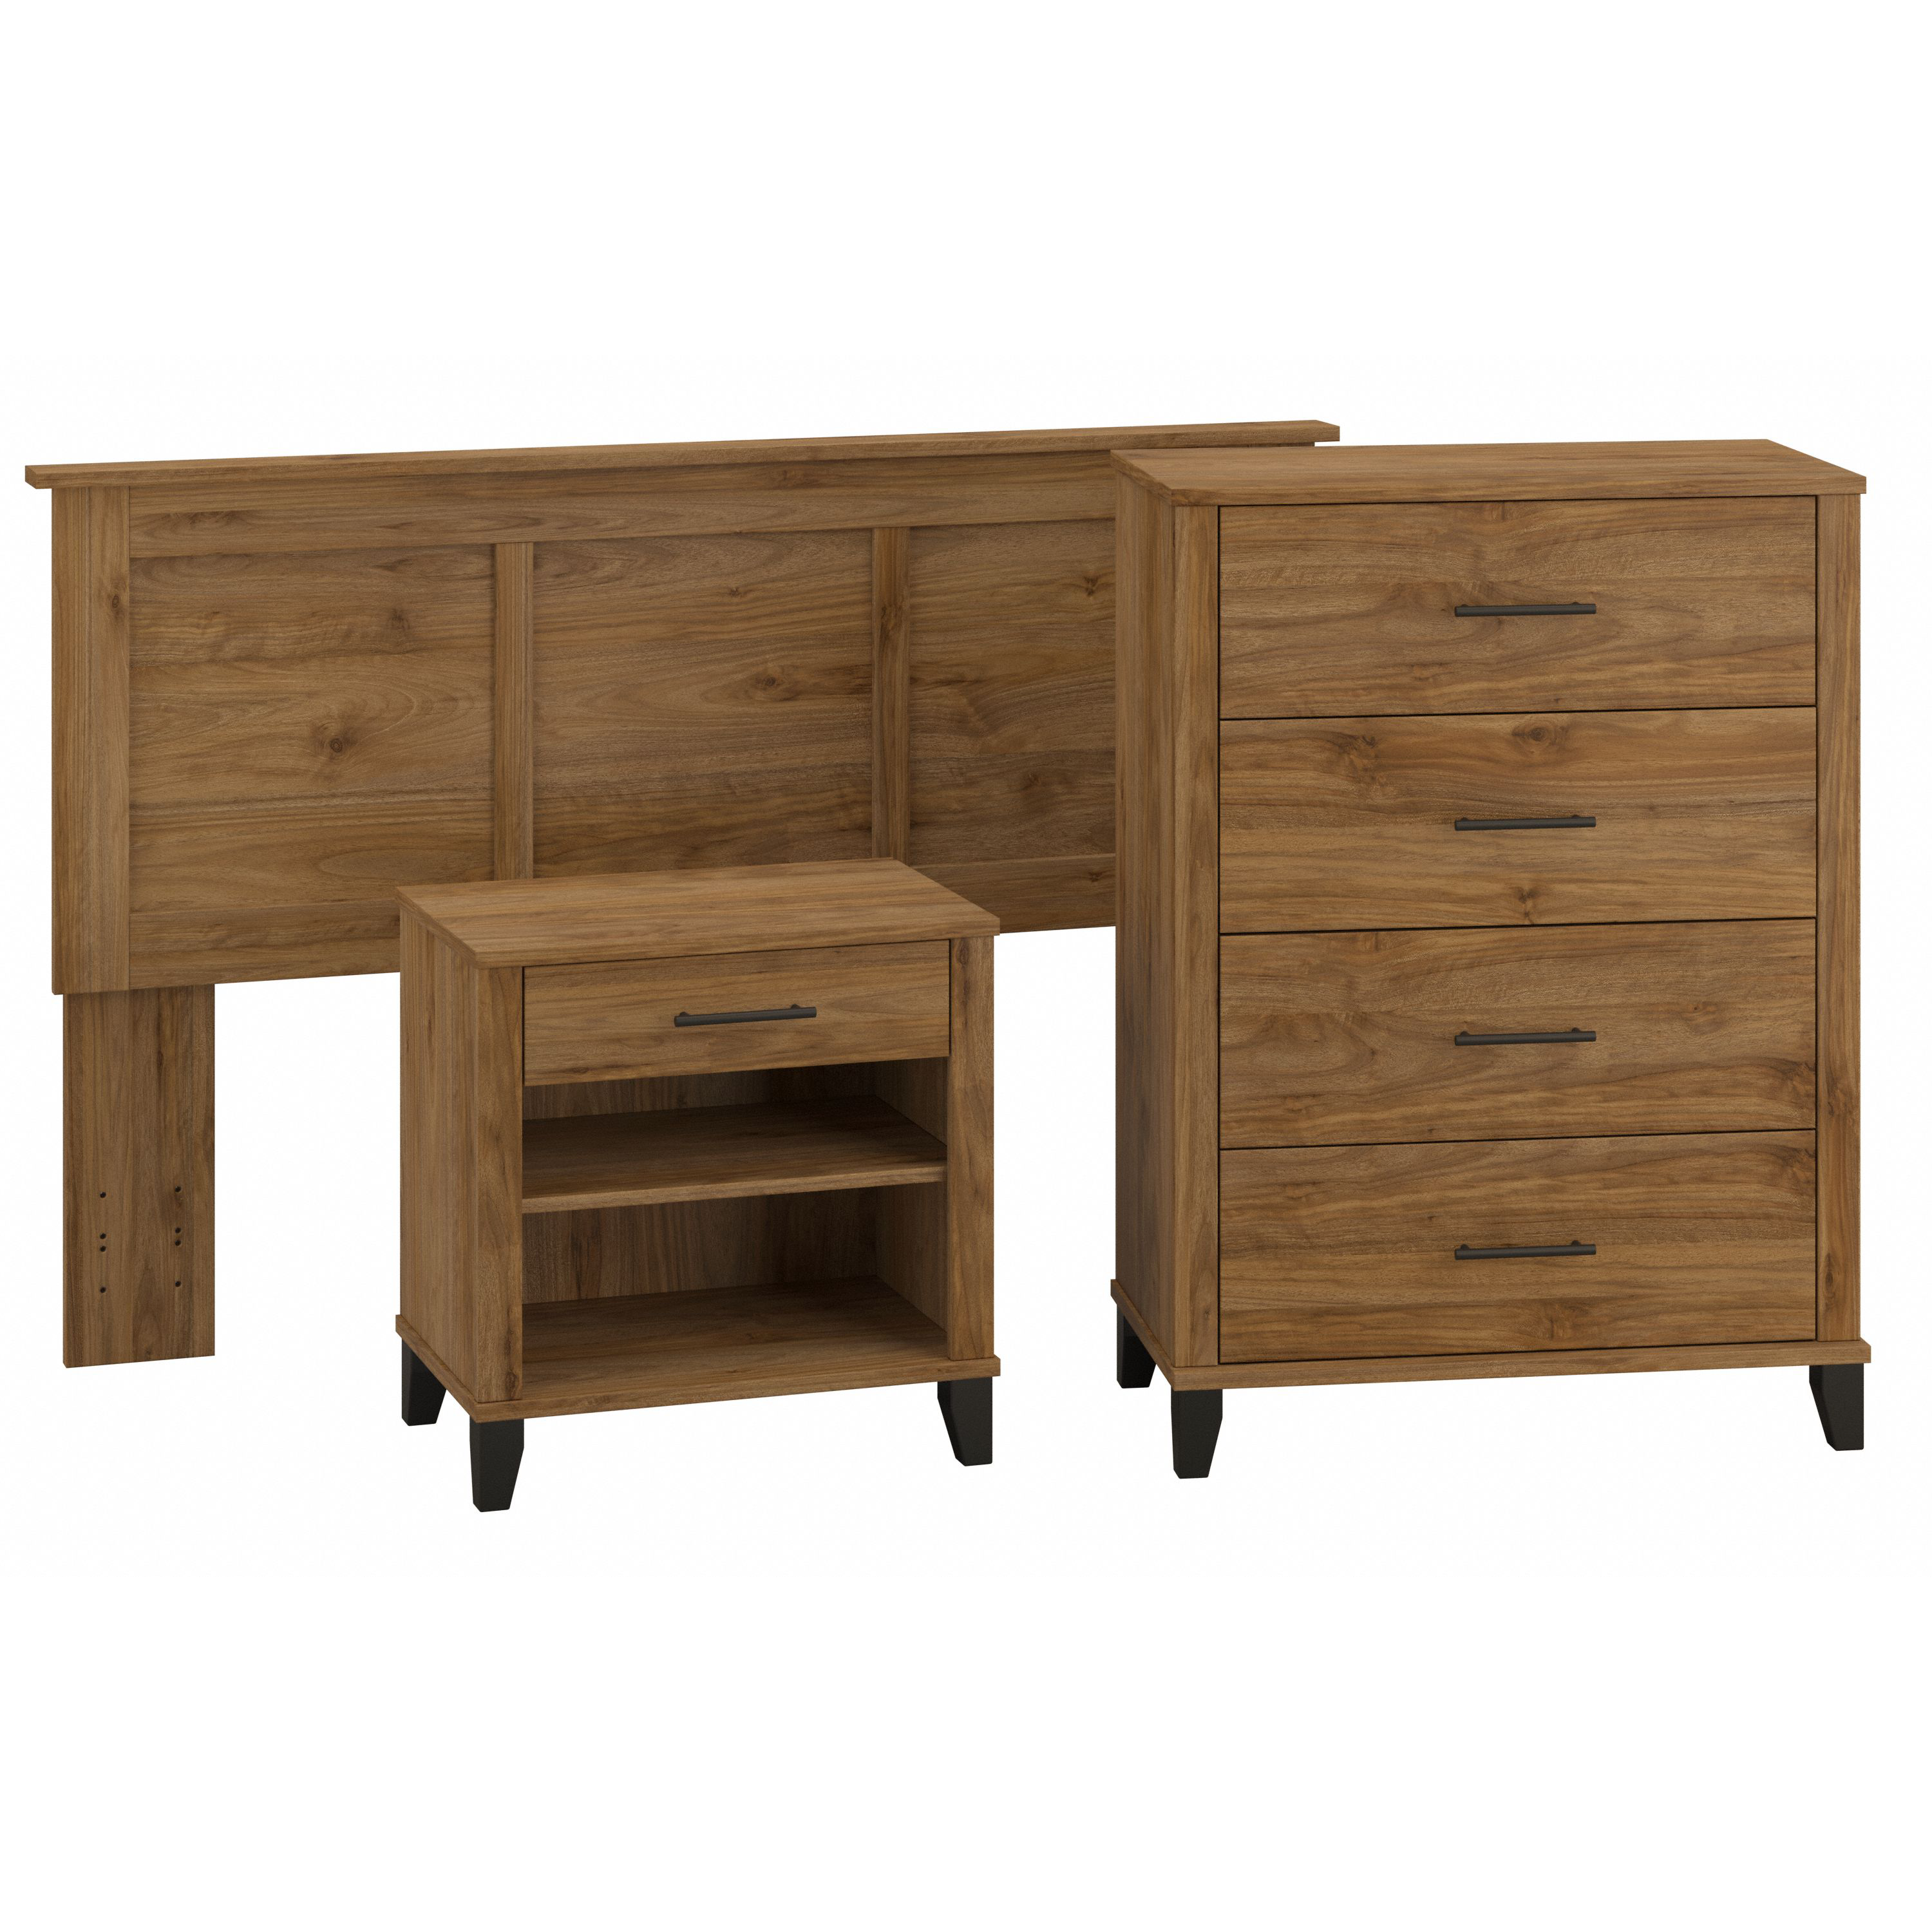 Shop Bush Furniture Somerset Full/Queen Size Headboard, Chest of Drawers and Nightstand Bedroom Set 02 SET005FW #color_fresh walnut